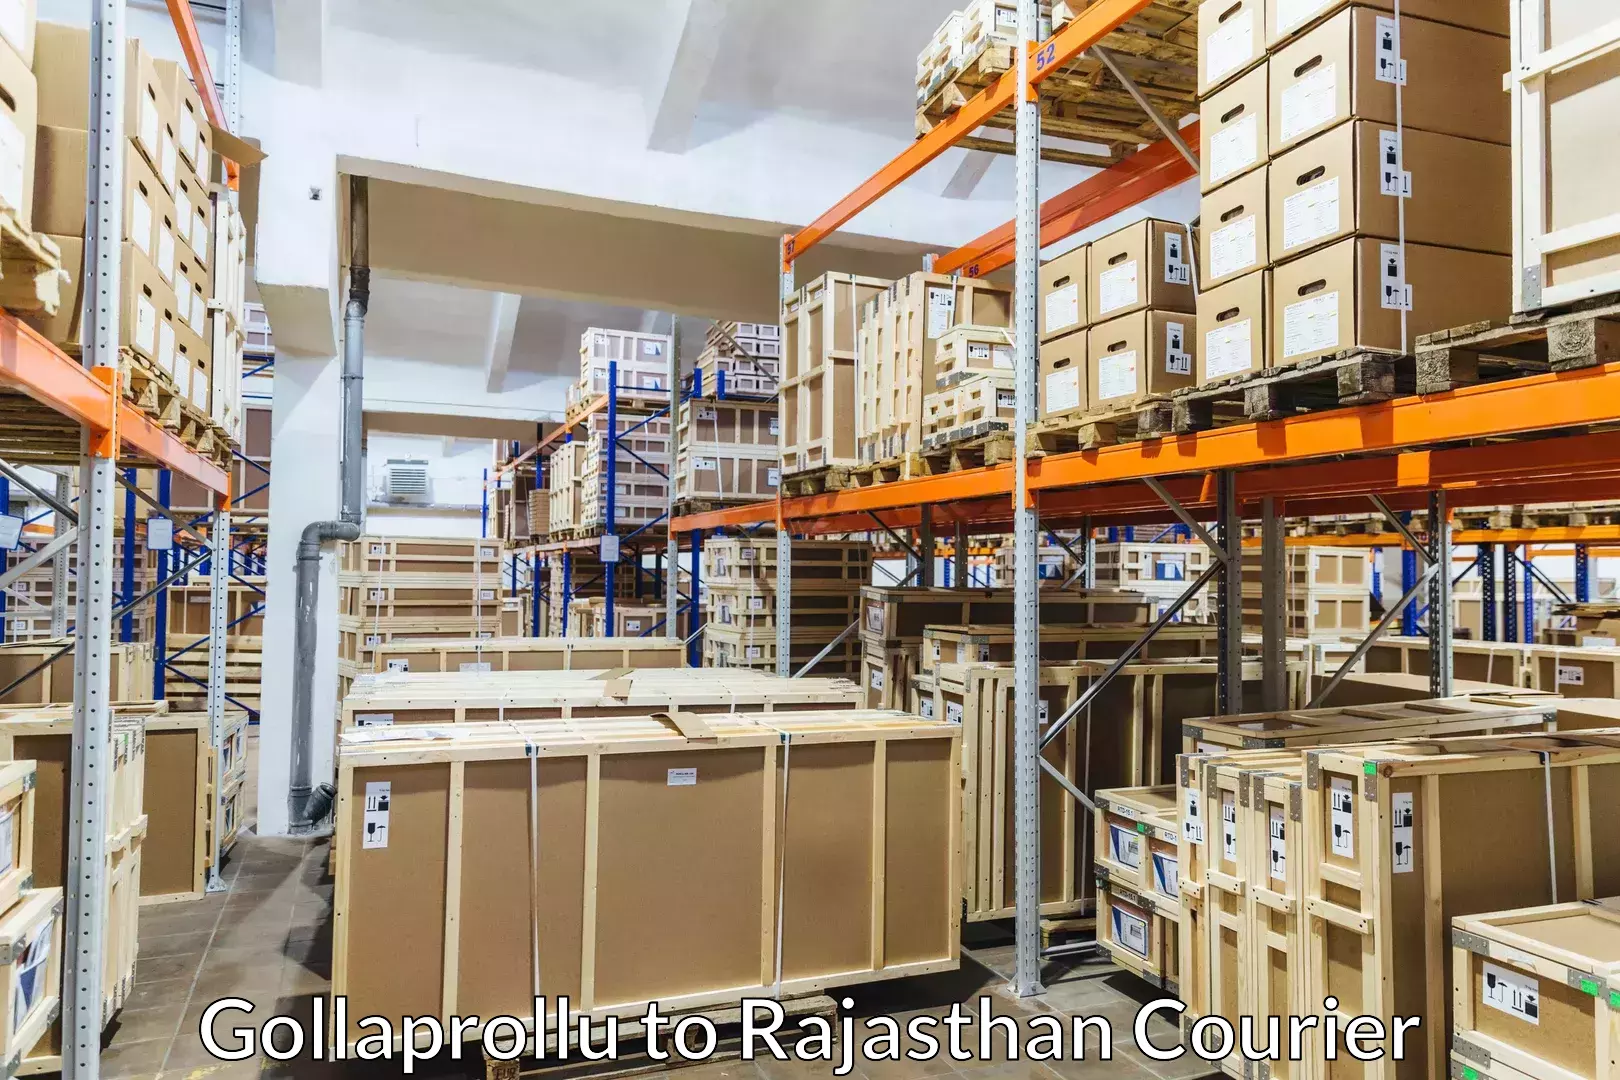 Furniture relocation experts Gollaprollu to Malsisar